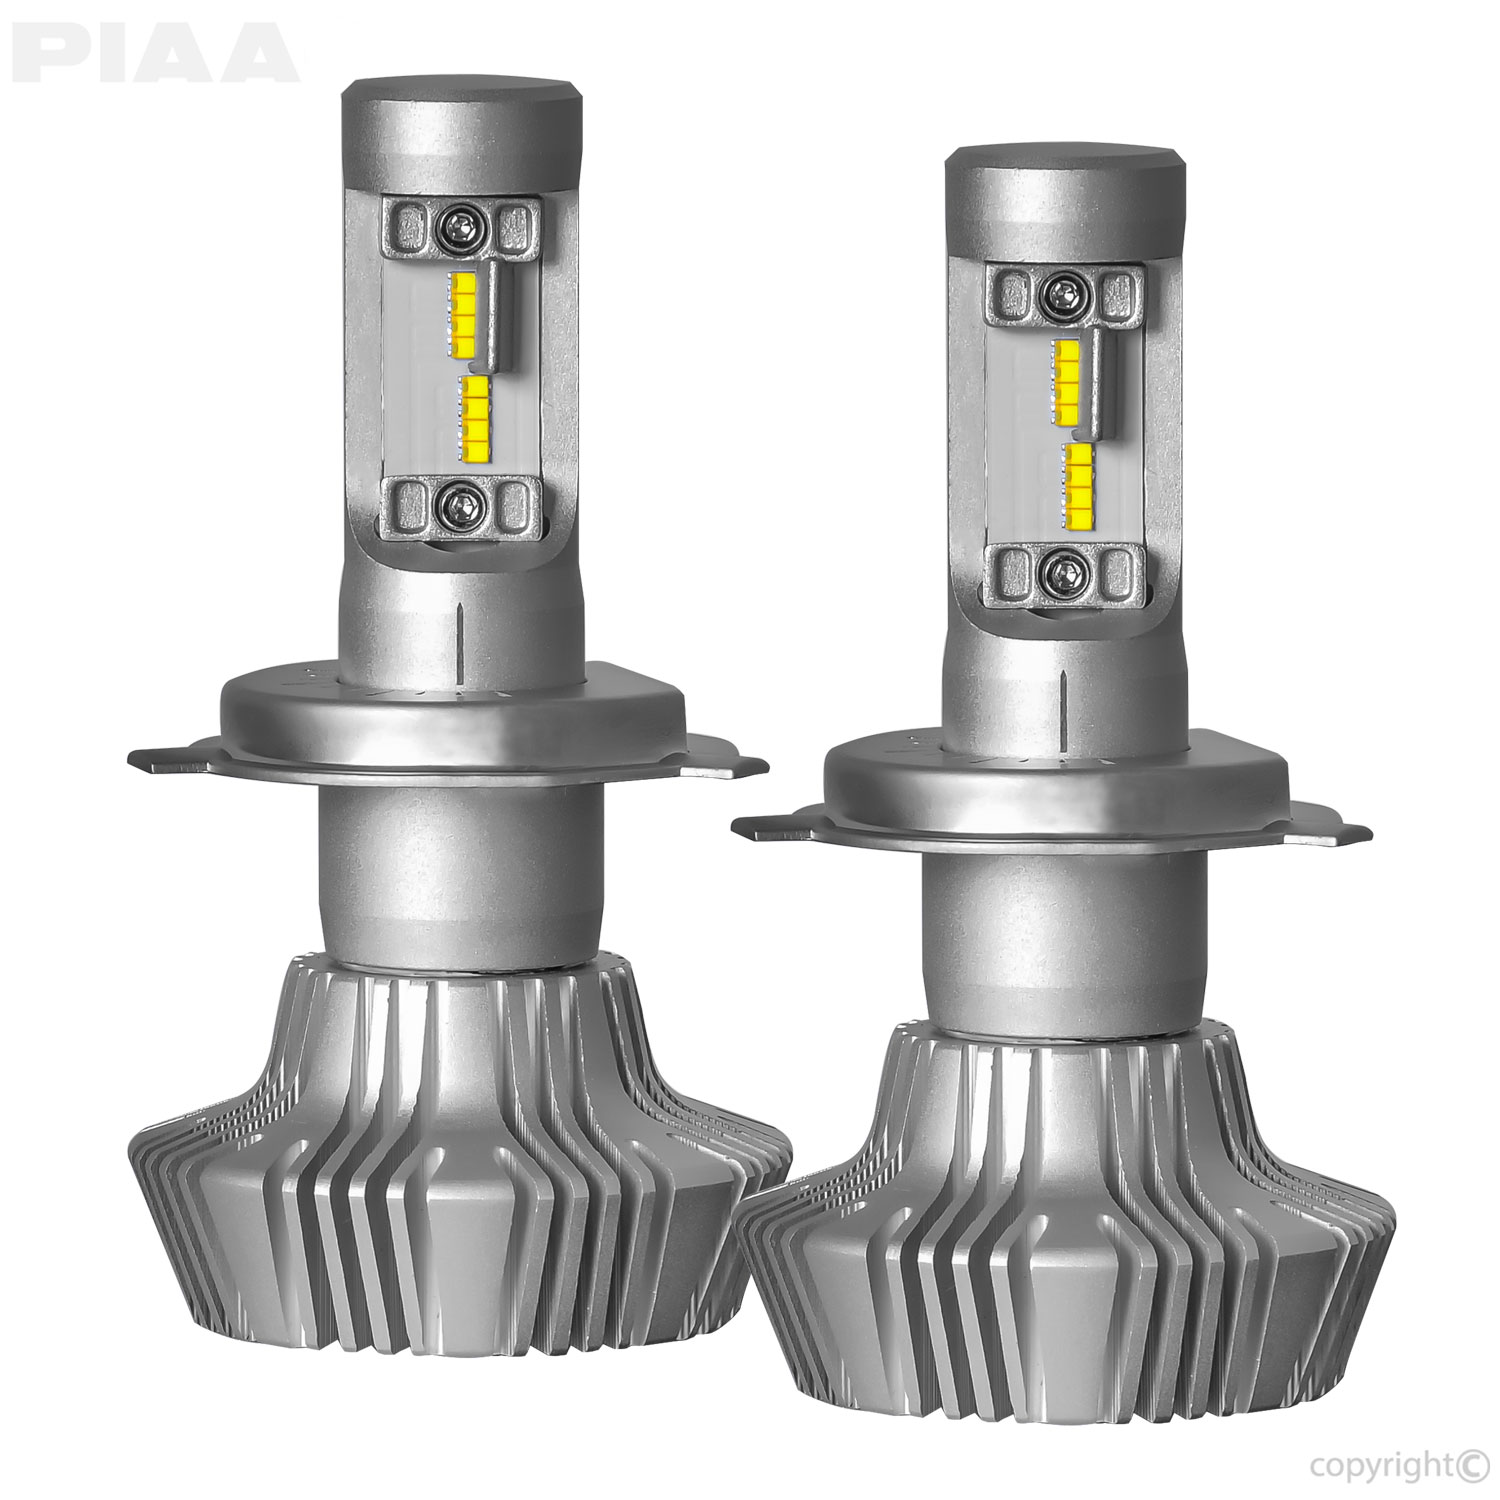 https://www.piaa.com/resize/Shared/product-images/automotive-bulbs/piaa-26-17304-h4-platinum-white-dual-hr.jpg?bw=1000&w=1000&bh=1000&h=1000